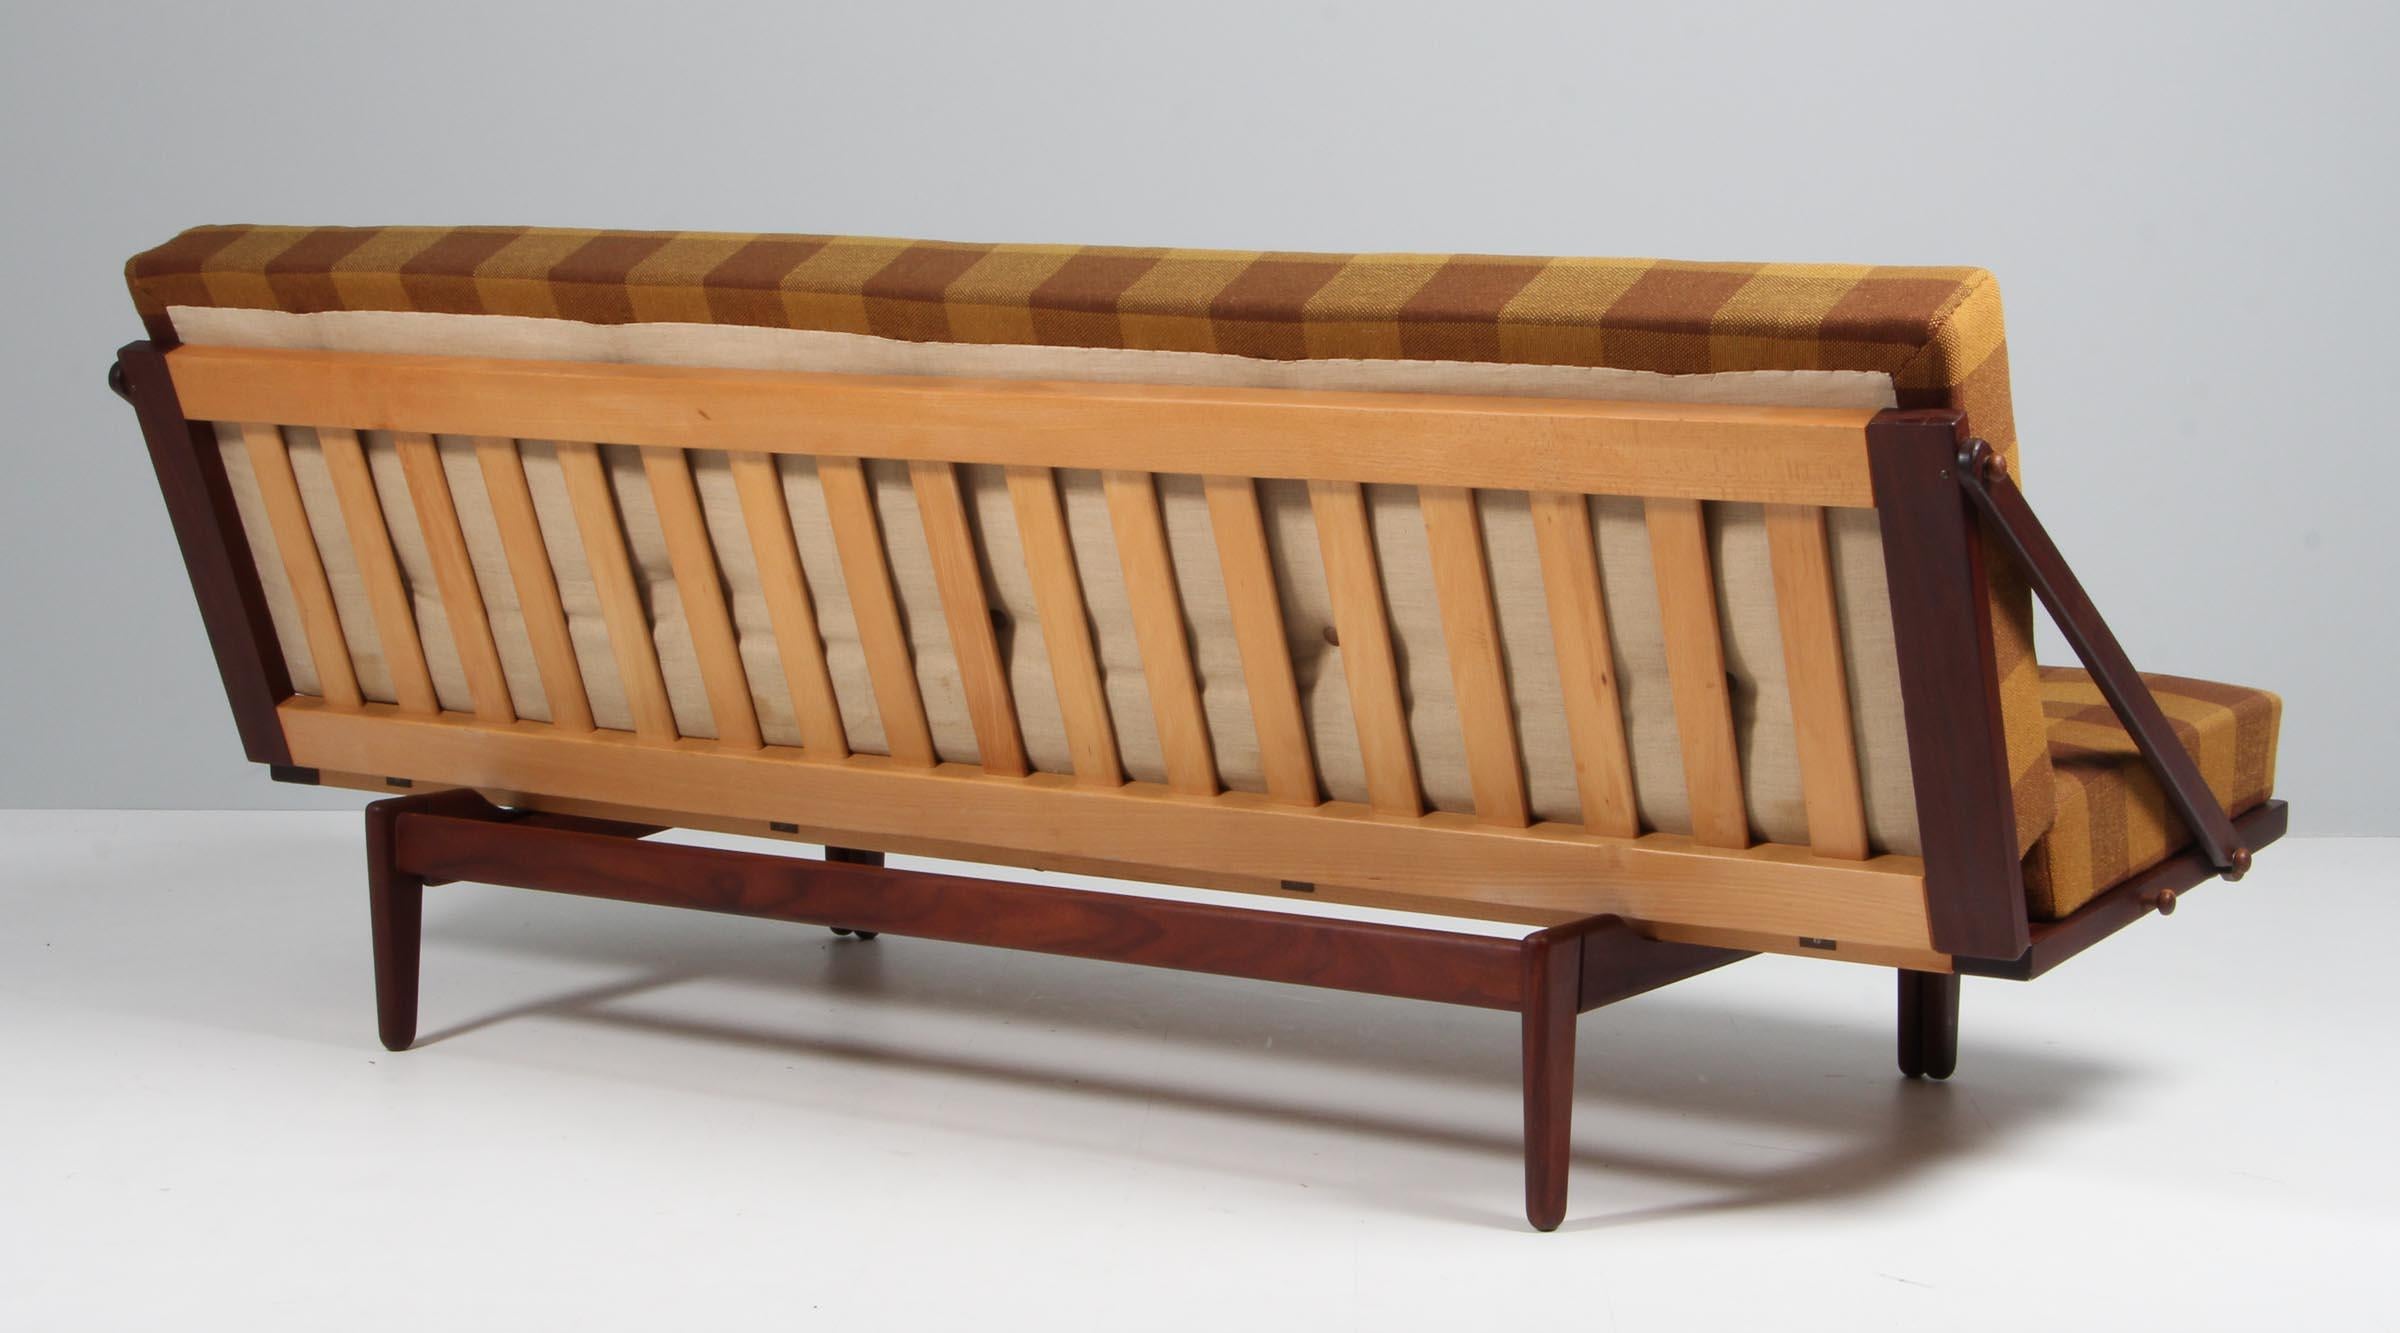 Very nice sophisticated daybed sofa Model 981 designed by Poul M Volther and manufactured by Frem Røjle, Denmark, 1959. This sofa is called 'Diva' and has a solid teak structure which can be folded down to create a daybed. Multi functional sofa. The